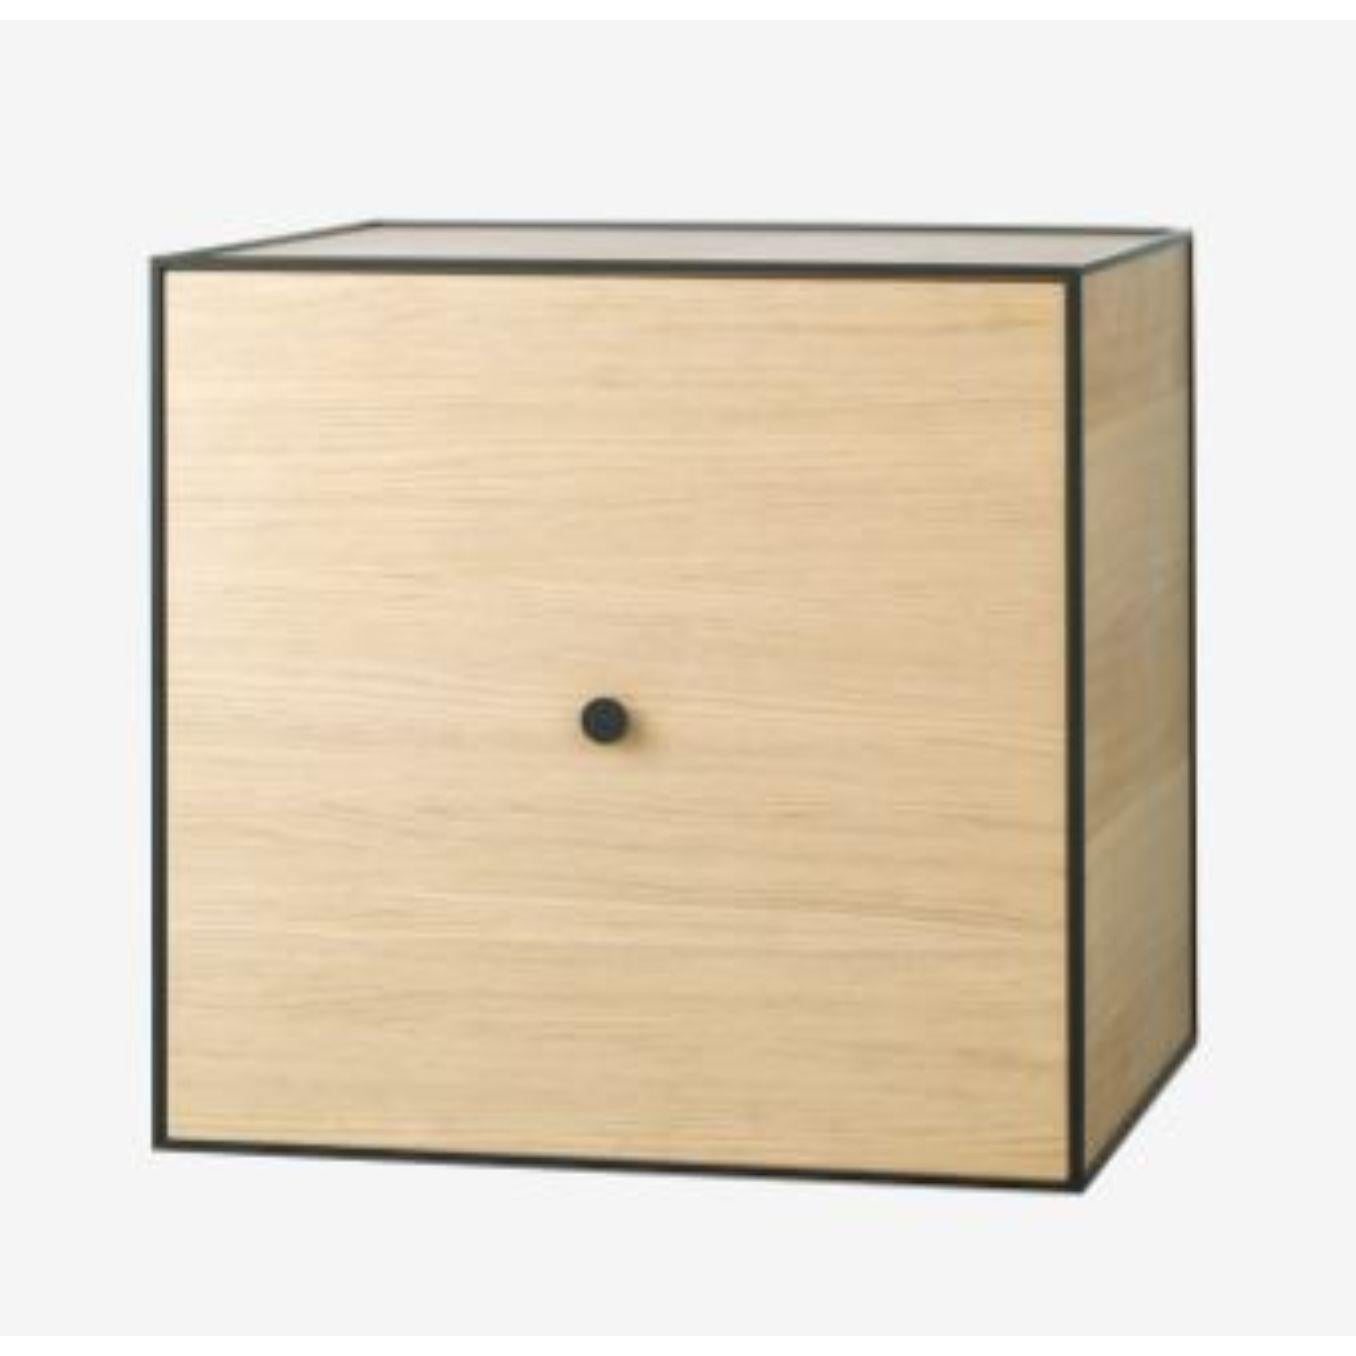 49 oak frame box with door / shelf by Lassen
Dimensions: D 49 x W 42 x H 49 cm 
Materials: Finér, melamin, melamin, melamine, metal, veneer, oak
Also available in different colours and dimensions.
Weight: 17 kg


By Lassen is a Danish design